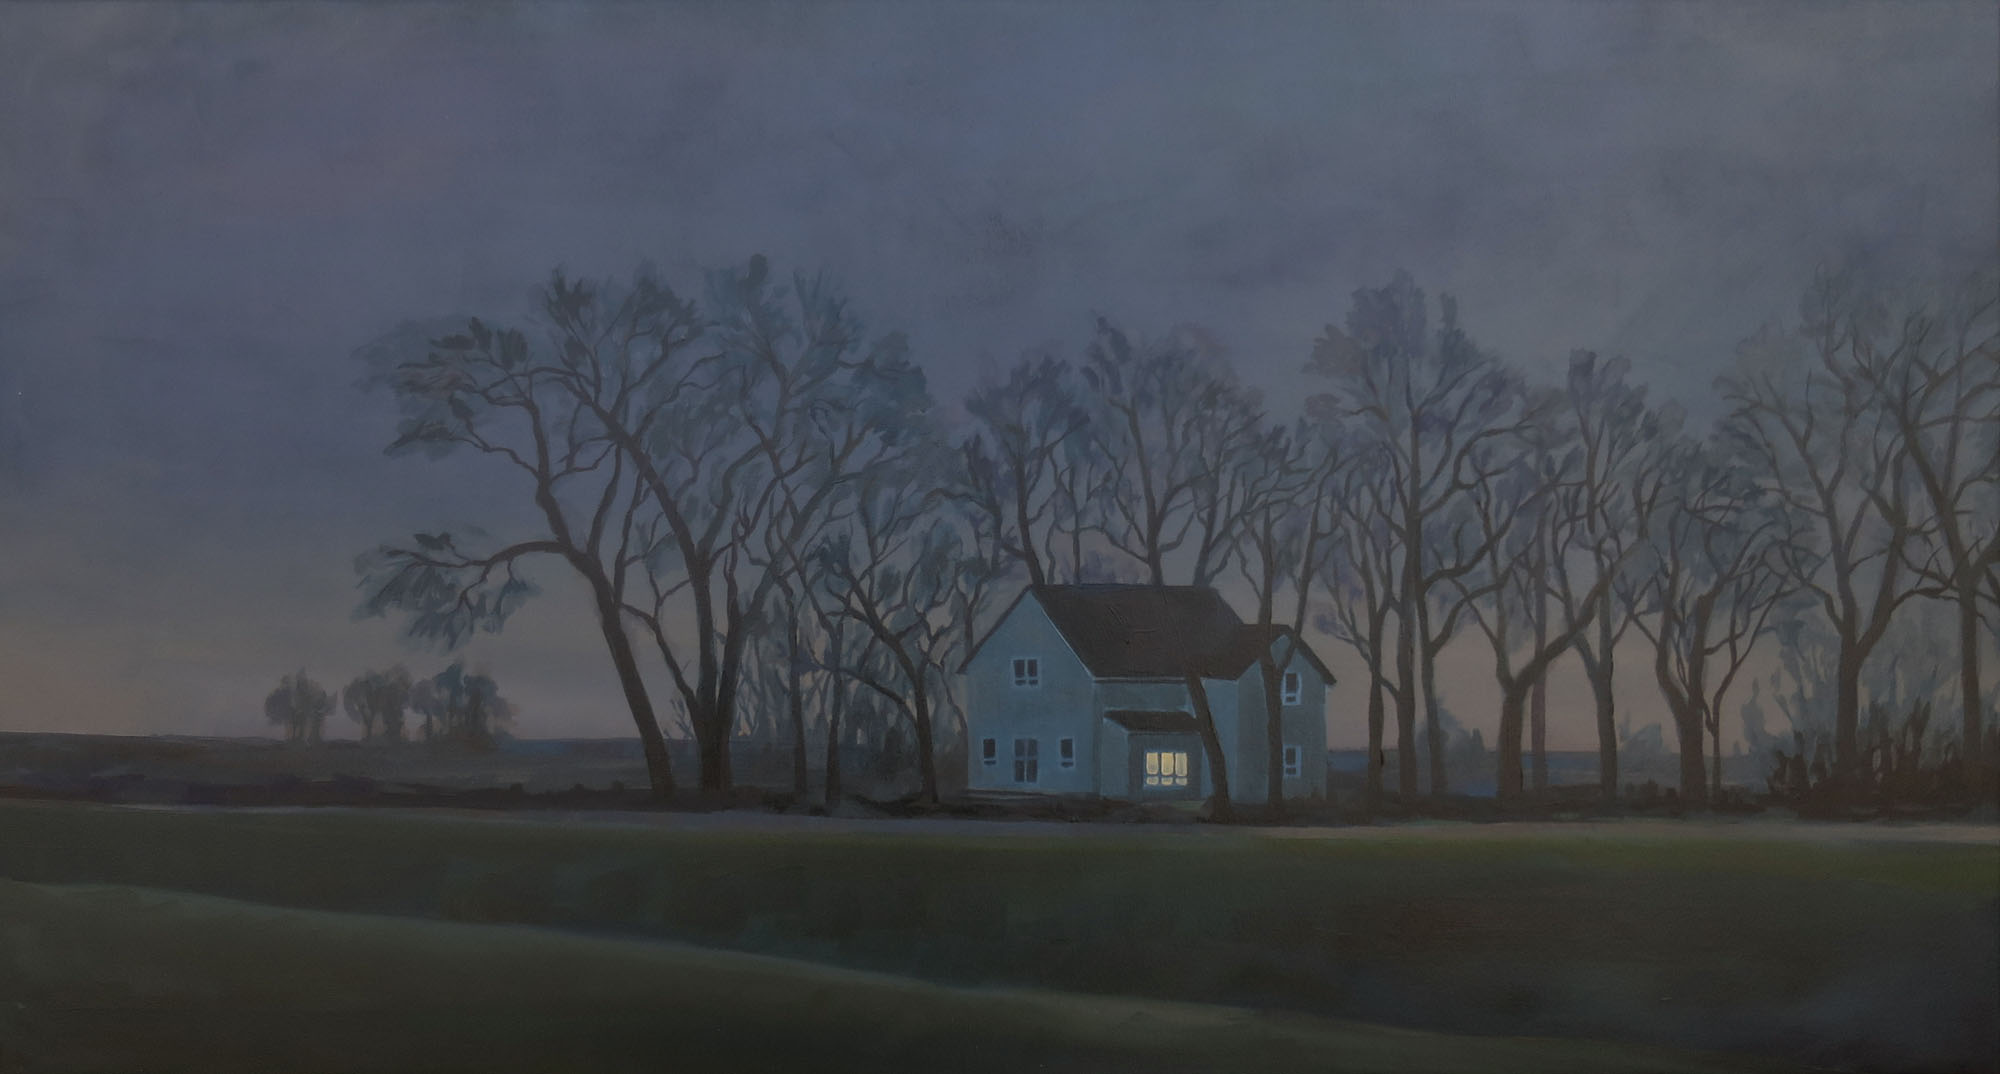 the_solitary_house_in_the_evening_2015_59x110.jpg